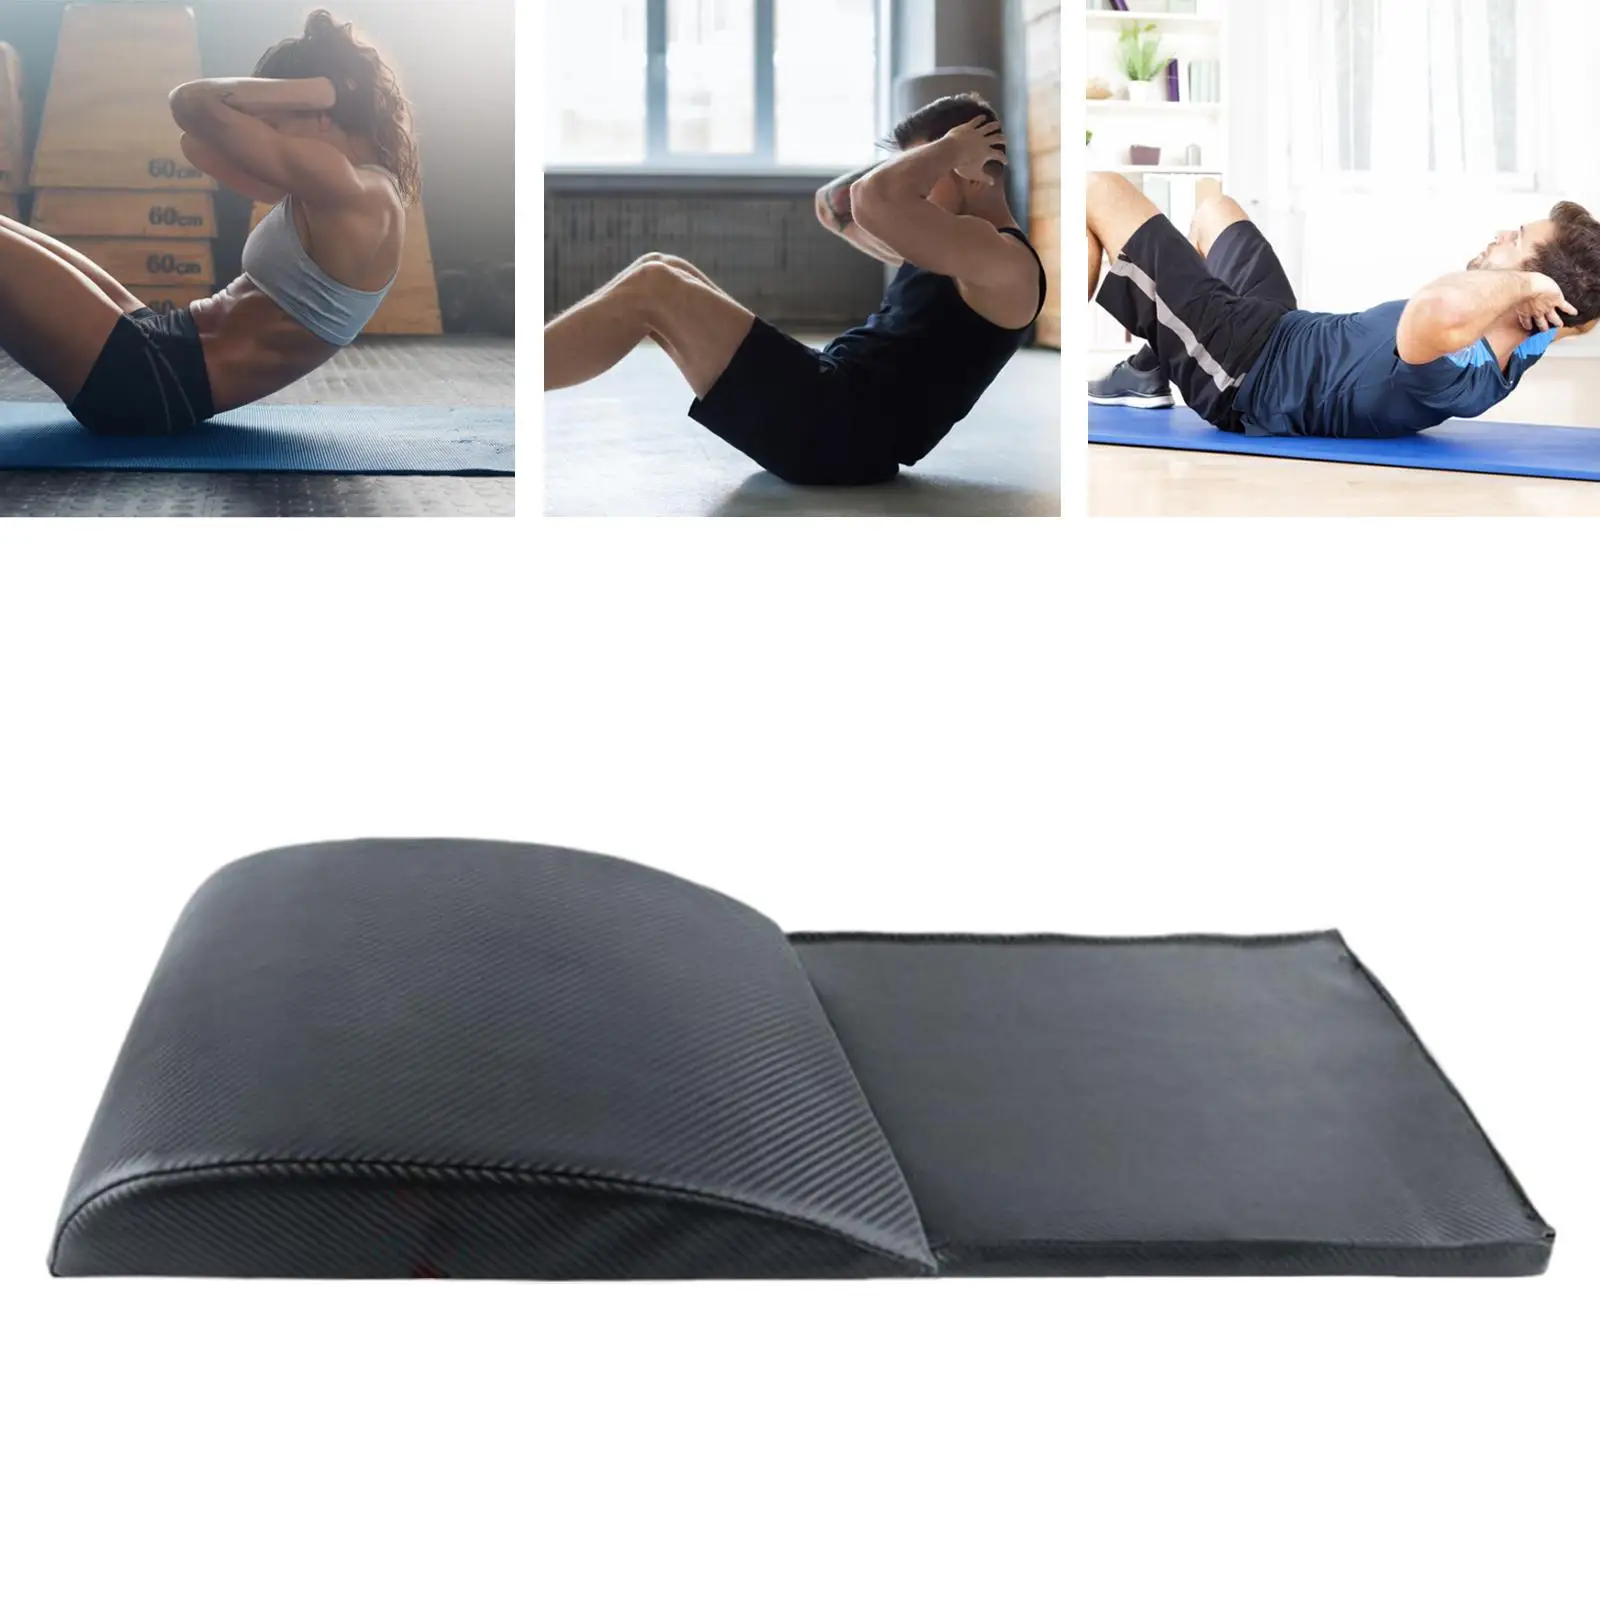 Fitness Ab Pad W/ Tailbone Protector Waterproof Home Gym Abdominal Belly Foldable Soft Exercise Mat for Workouts Fitness Women